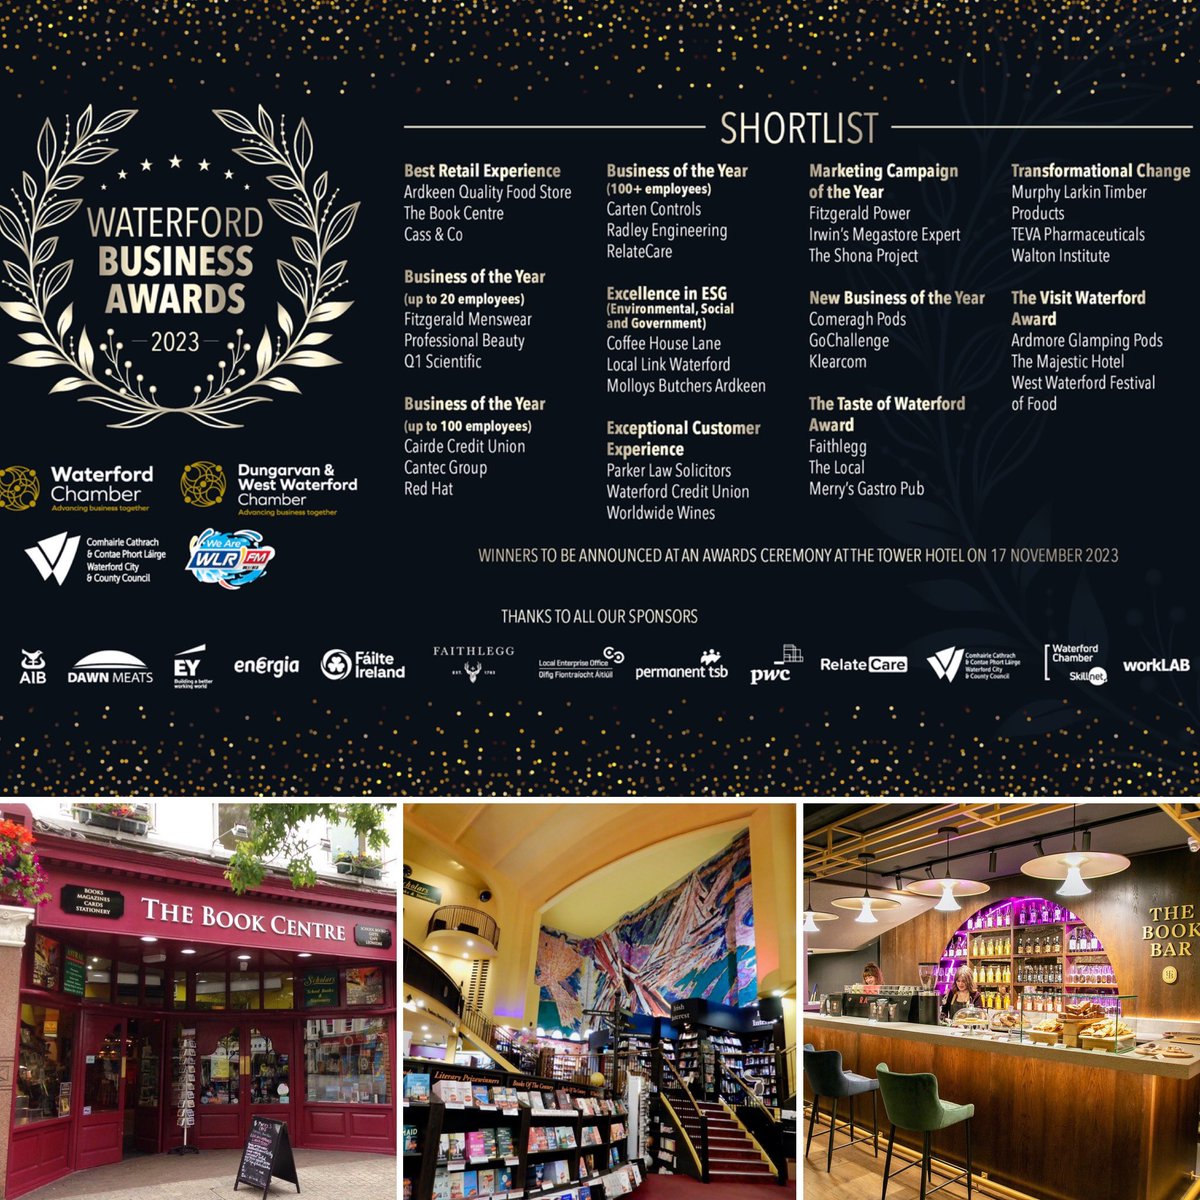 We are delighted be shortlisted in the 'Best Retail Experience' category for this years Waterford Business Awards 2023. Winners will be announced at an awards ceremony at the Tower Hotel on 17th November 2023. @wlrfm @WaterfordCounci @waterfordcc